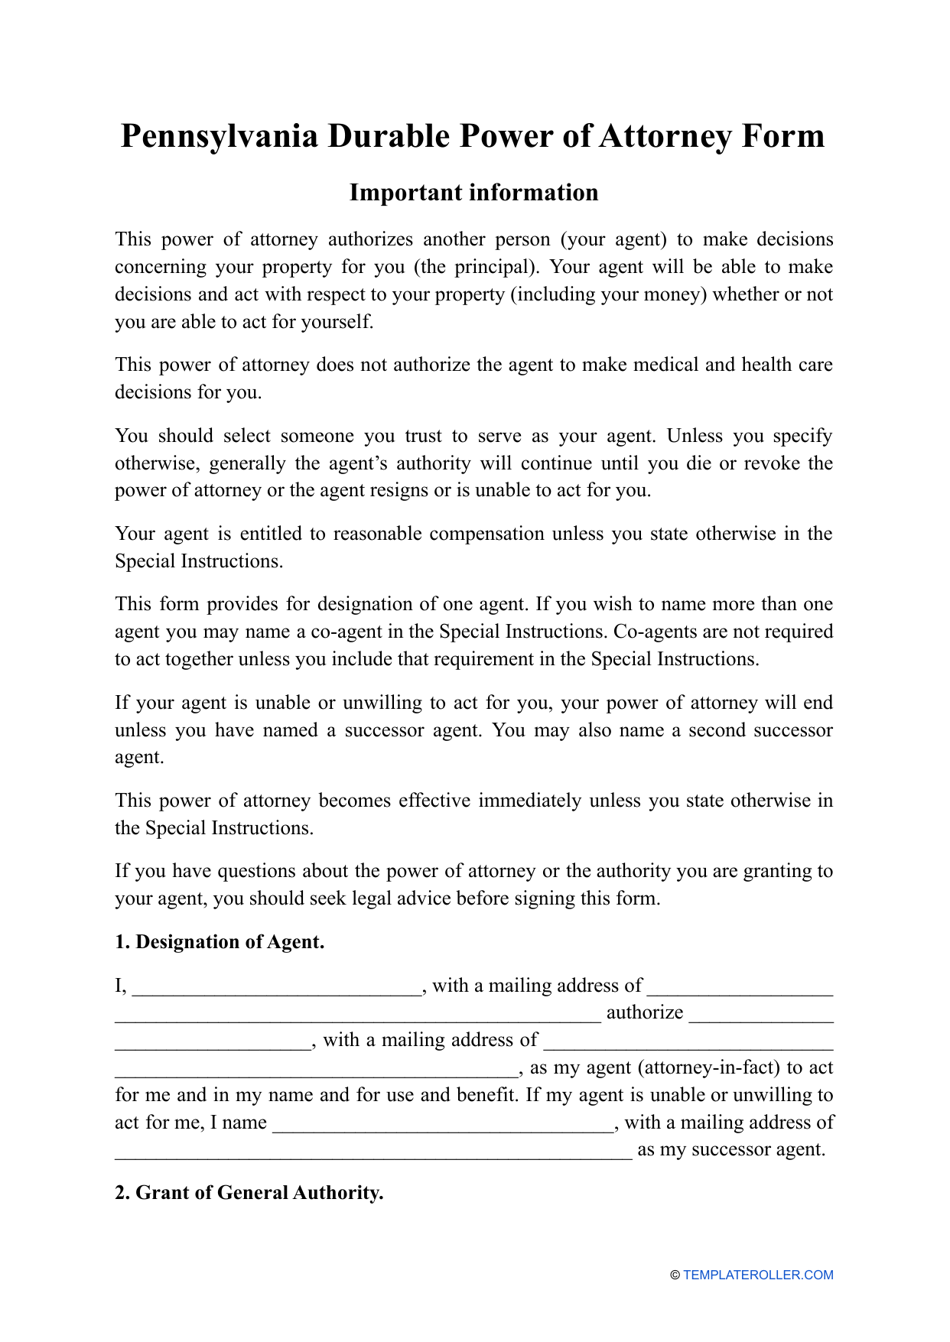 Durable Power of Attorney Form - Pennsylvania, Page 1